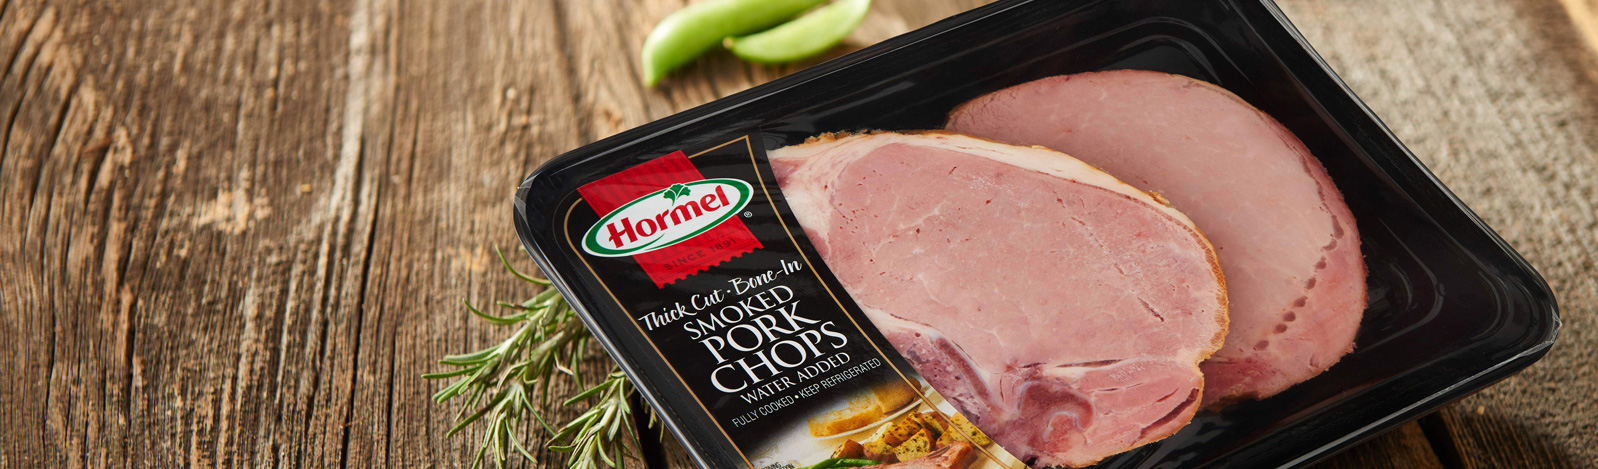 Pressure sensitive labels for Hormel product by Inland